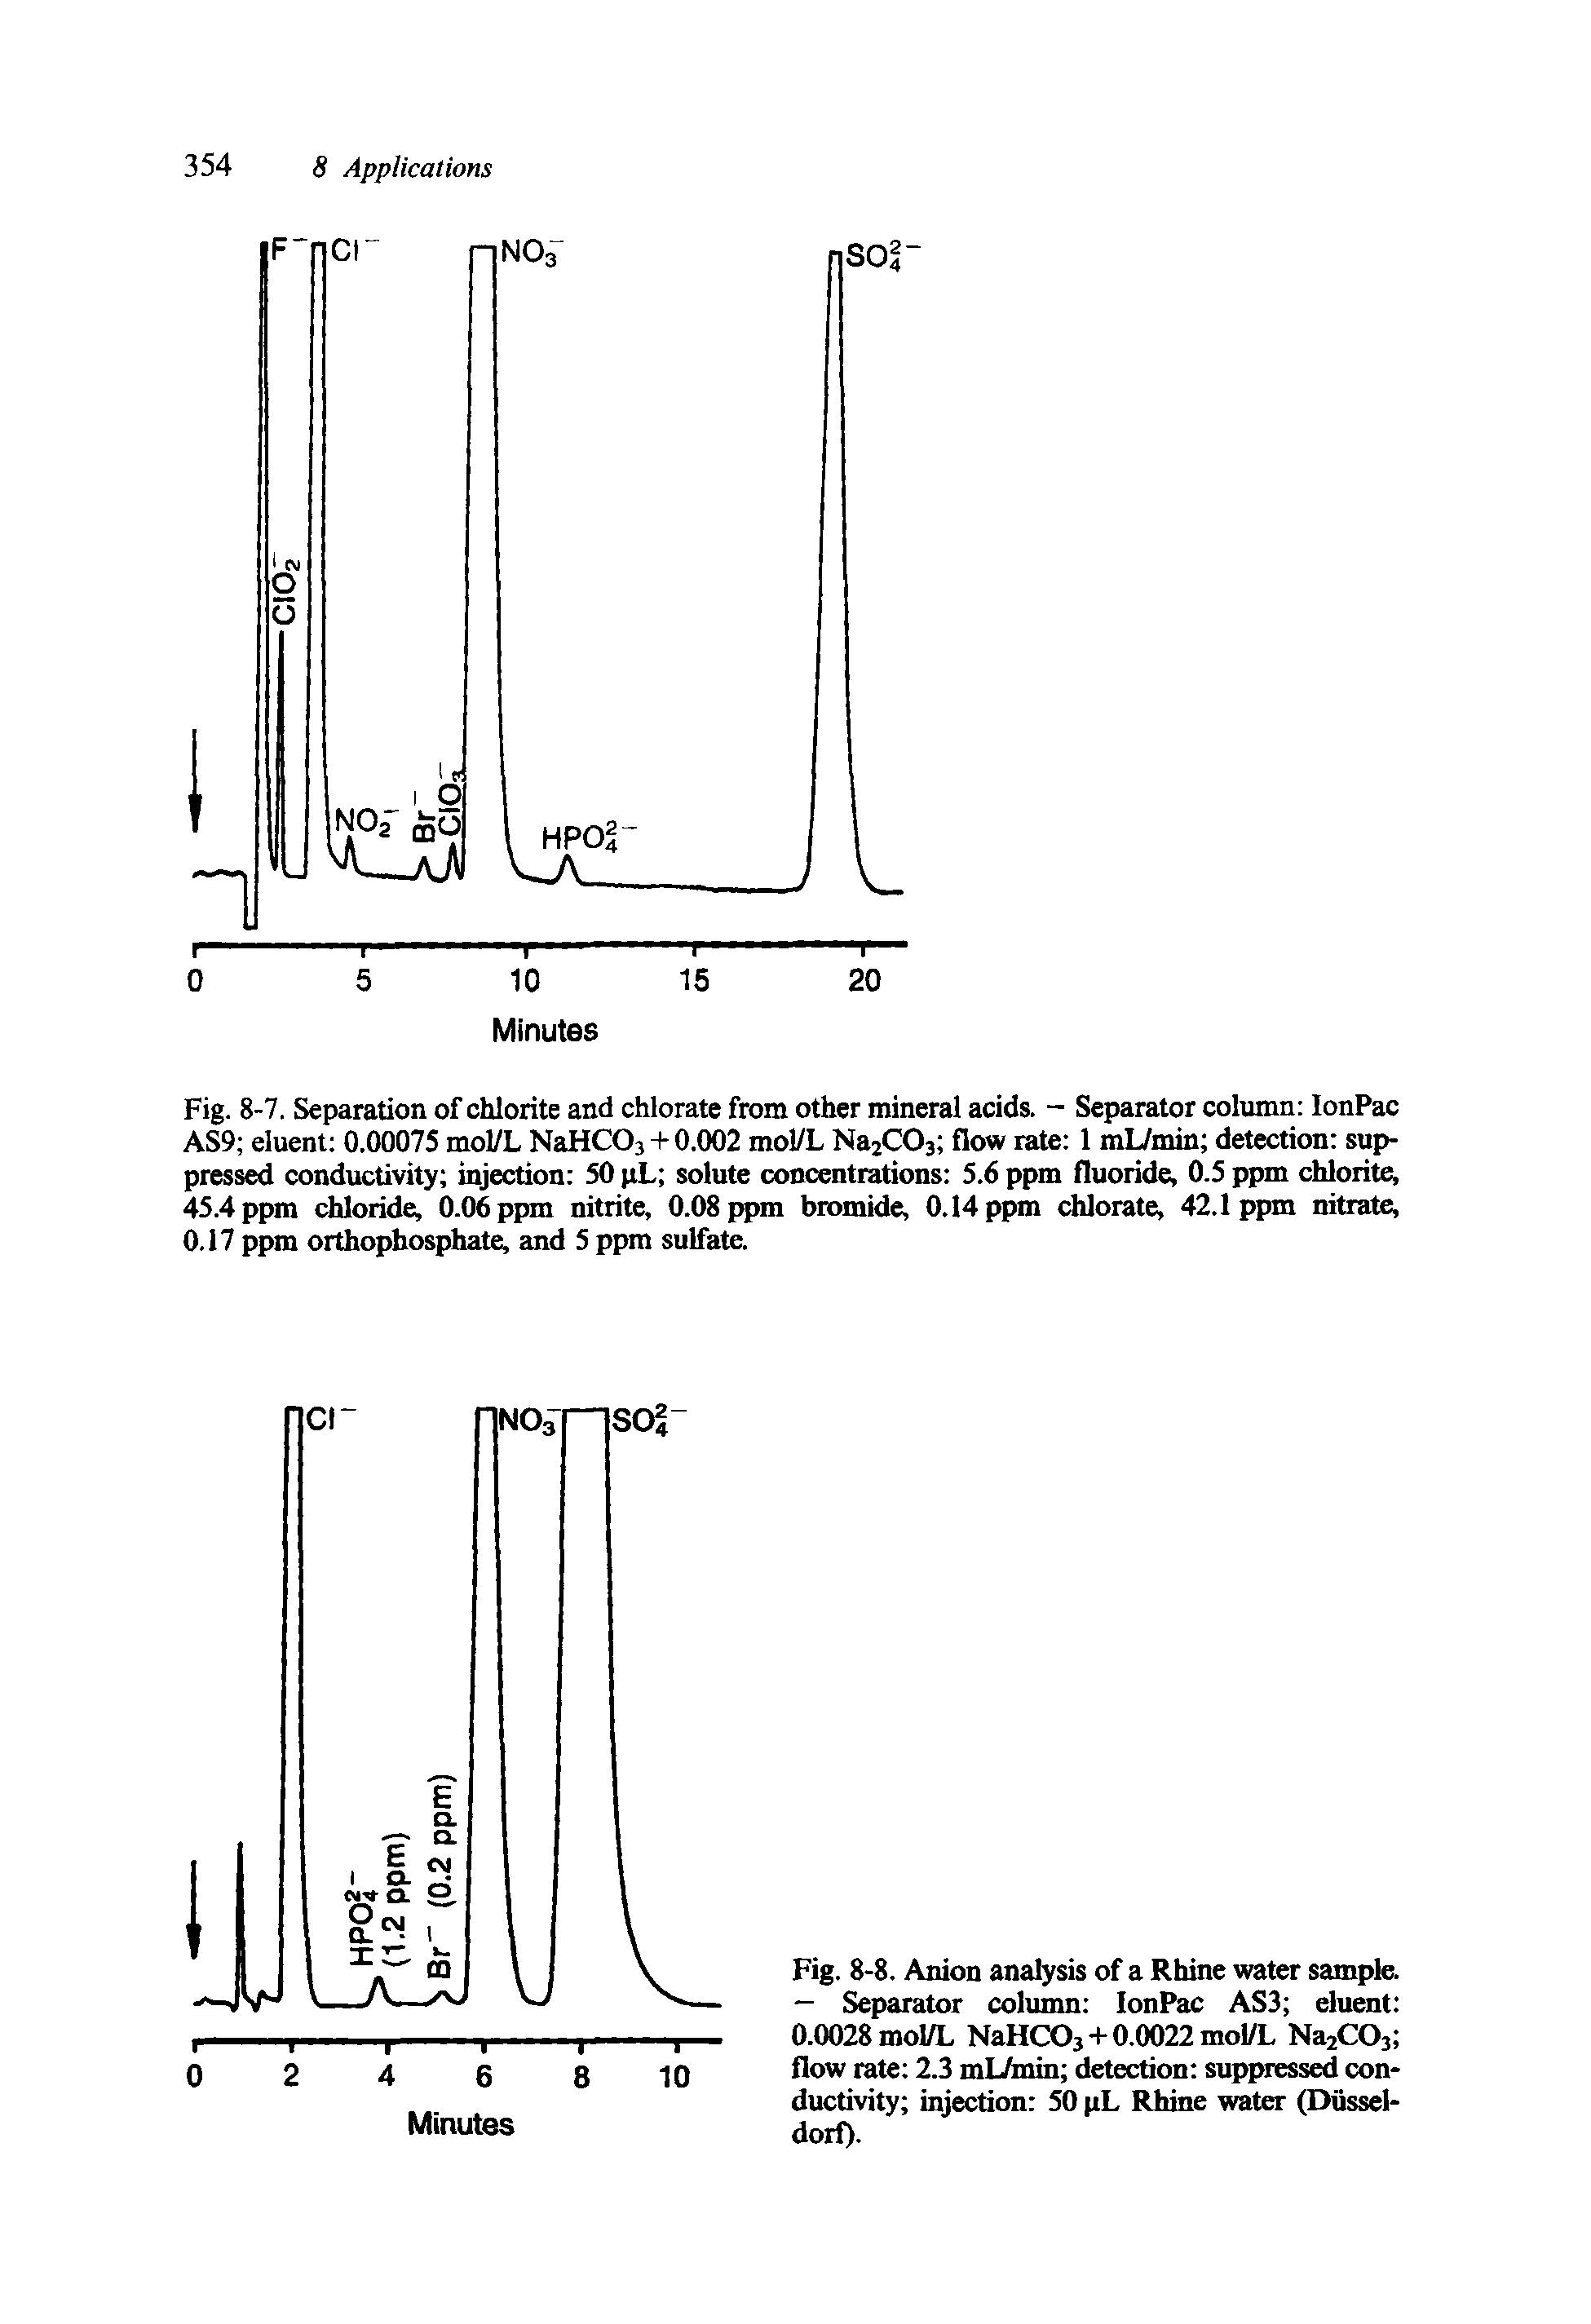 Fig. 8-8. Anion analysis of a Rhine water sample. — Separator column IonPac AS3 eluent 0.0028 mol/L NaHCOj + 0.0022 mol/L Na2C03 flow rate 2.3 mL/min detection suppressed conductivity injection 50 pL Rhine water (Dussel-dorf).